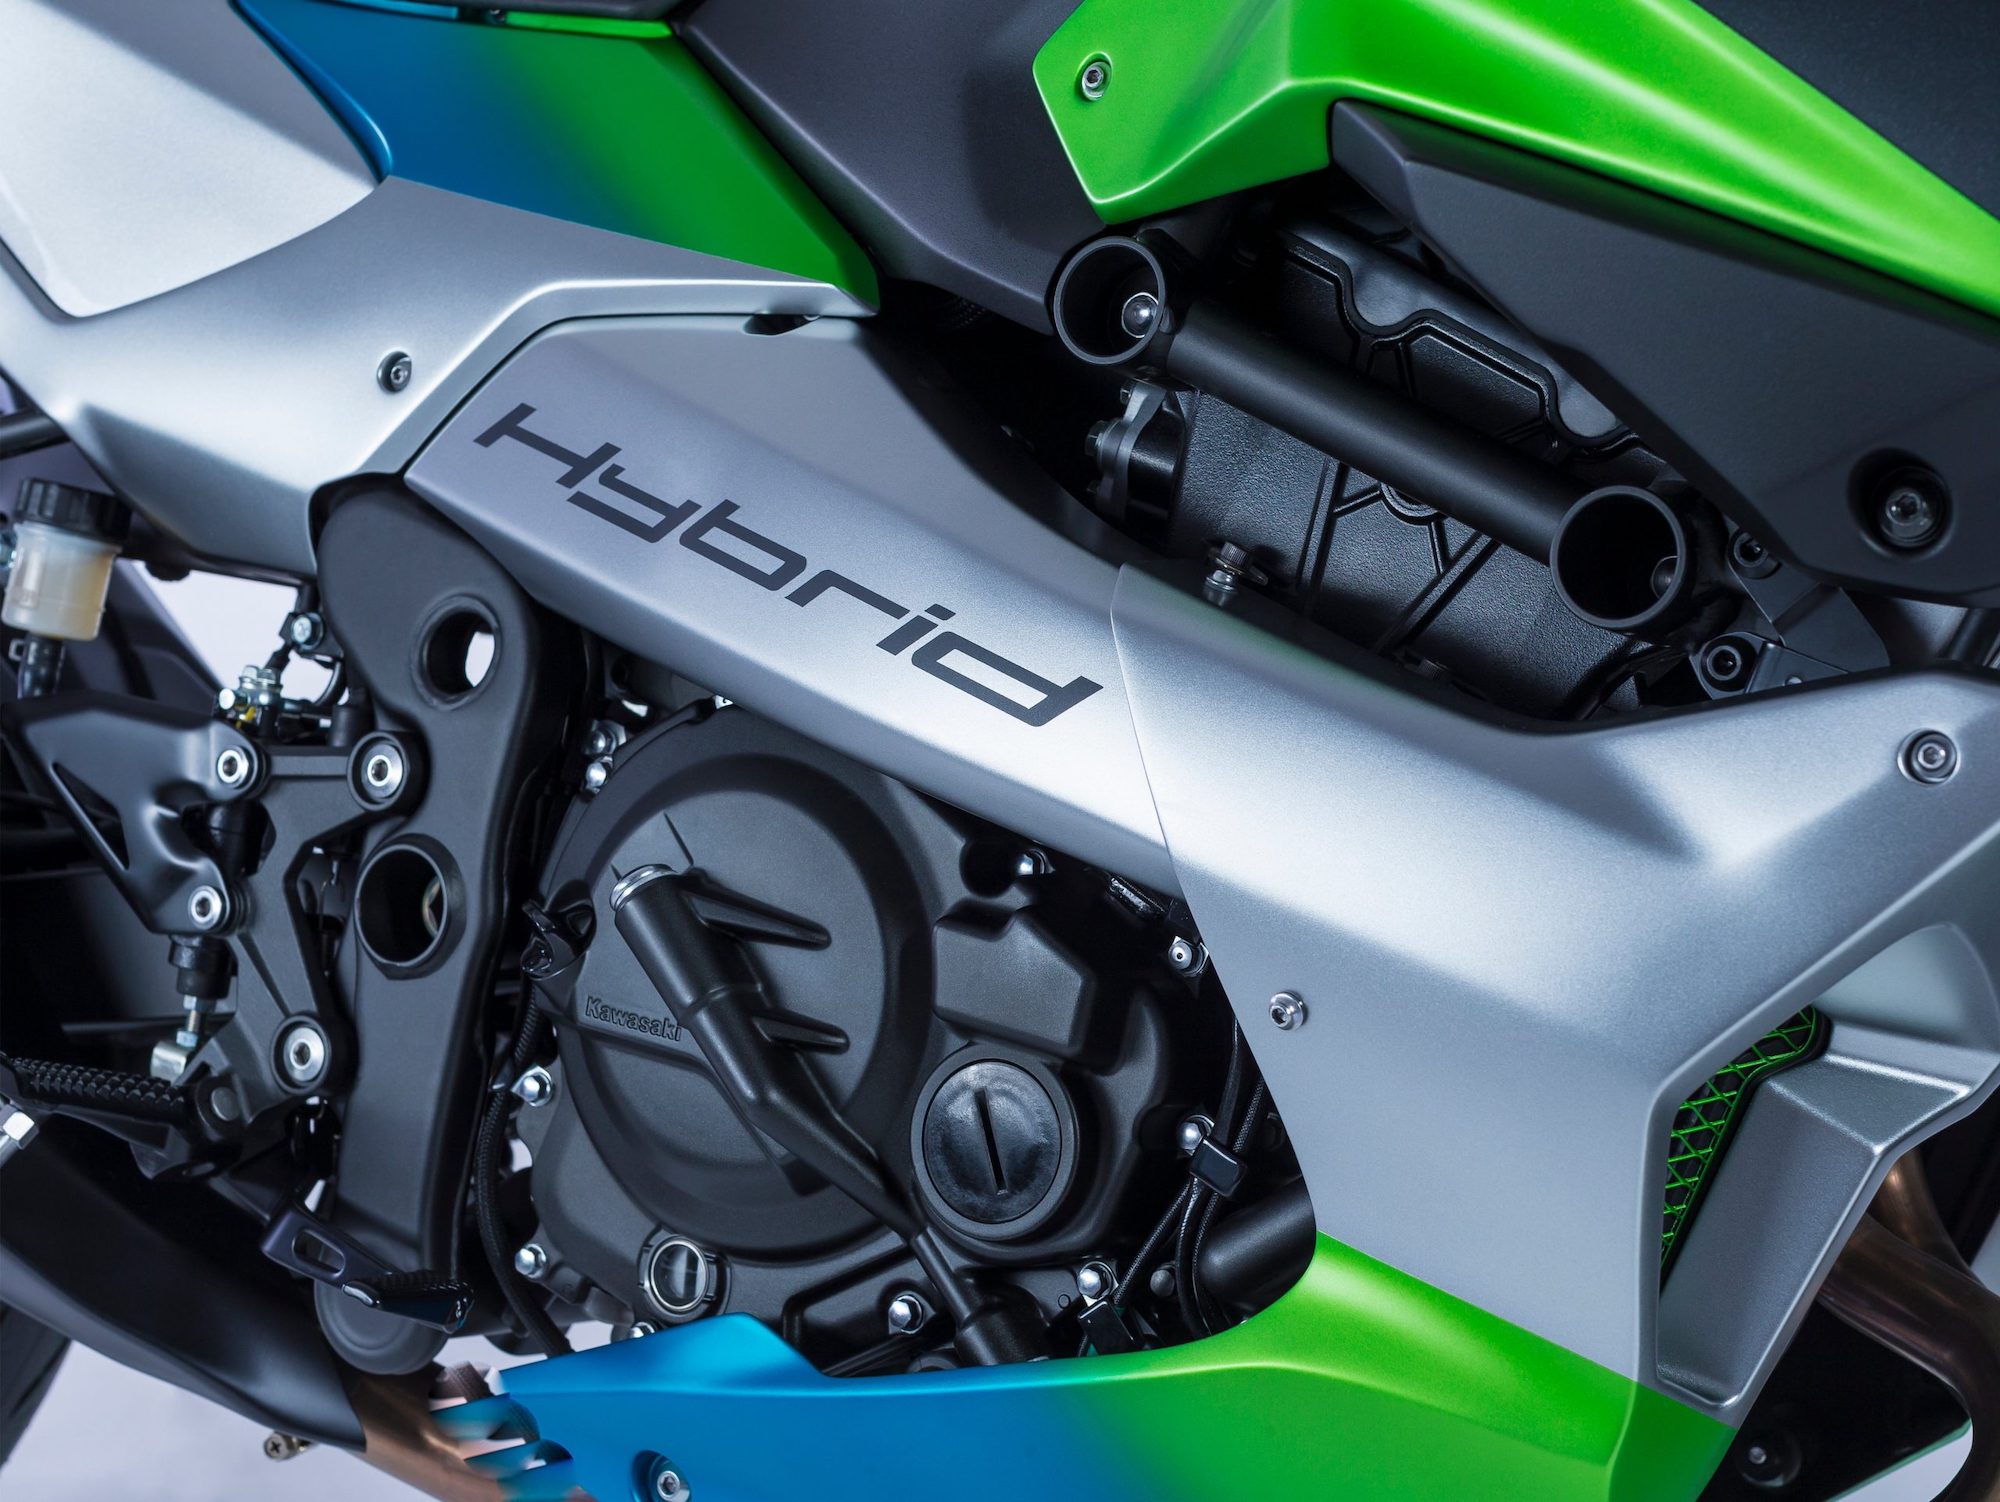 Kawasaki's reveal of four bikes at EICMA included several electric options, a hybrid, and an experimental hydrogen concept. Media sourced from The Autopian.